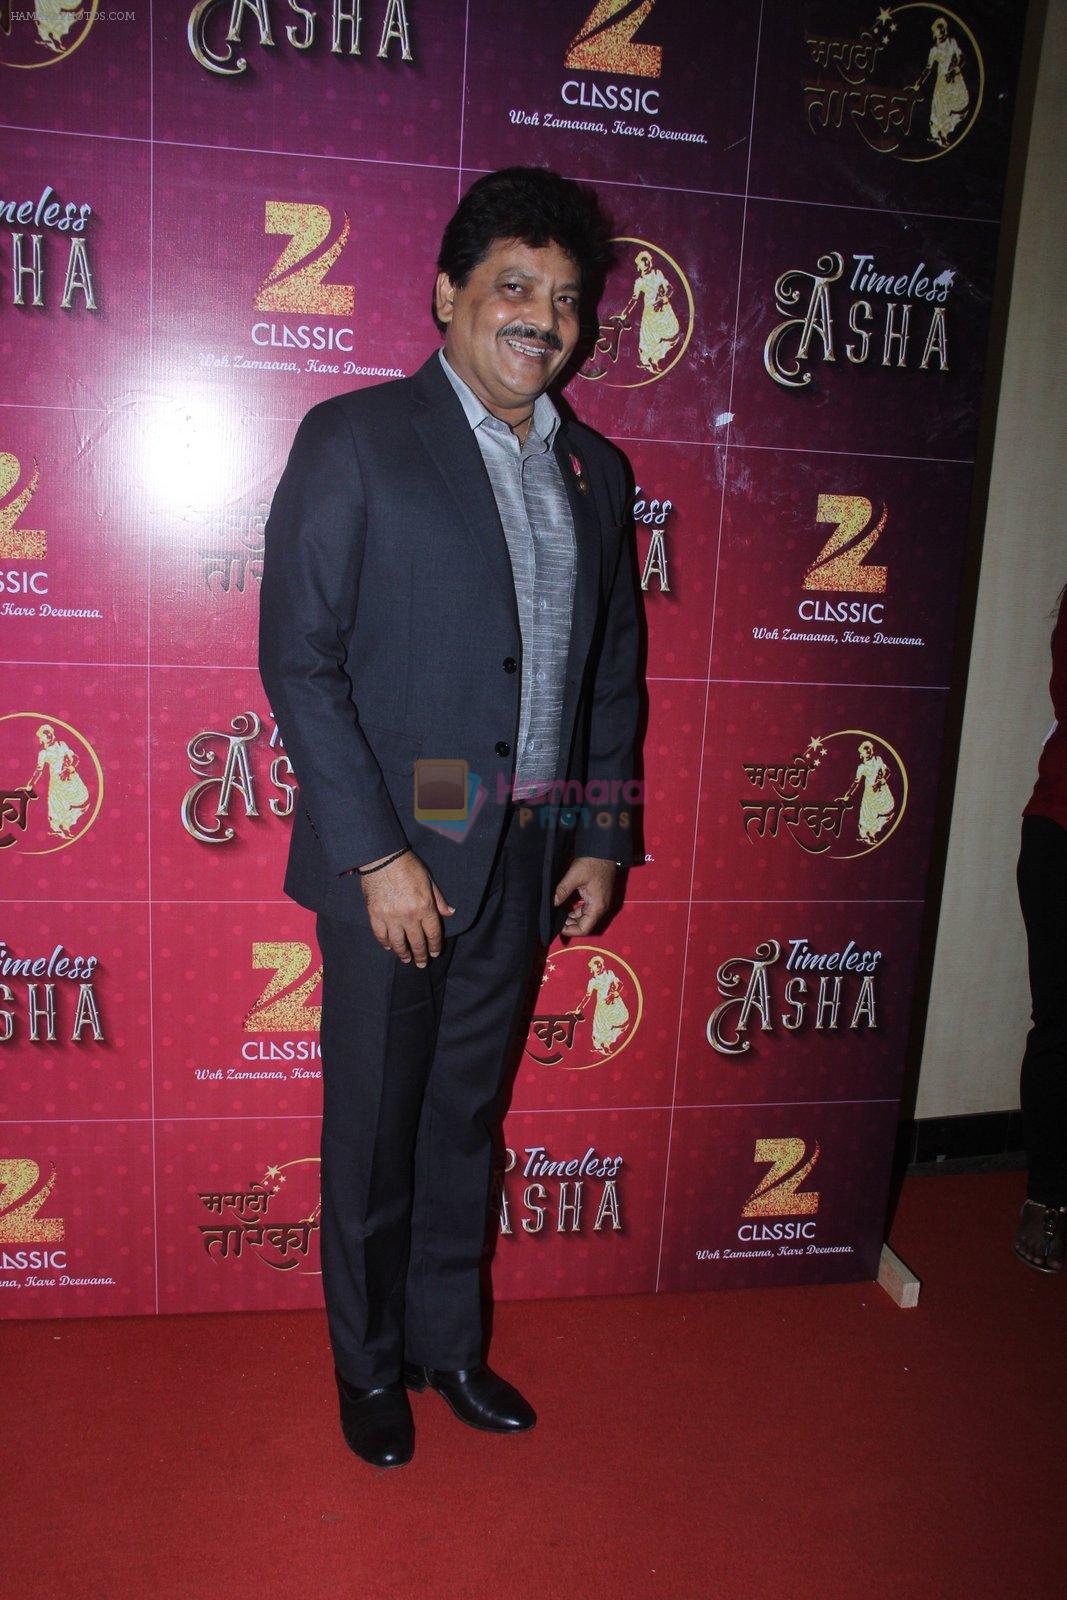 Bollywood singer Udit Narayan during the musical concert Timless Asha organised by Zee Classsic on occasion of Bollywood singer Asha Bhosle 83rd birthday in Mumbai, India on September 8, 2016